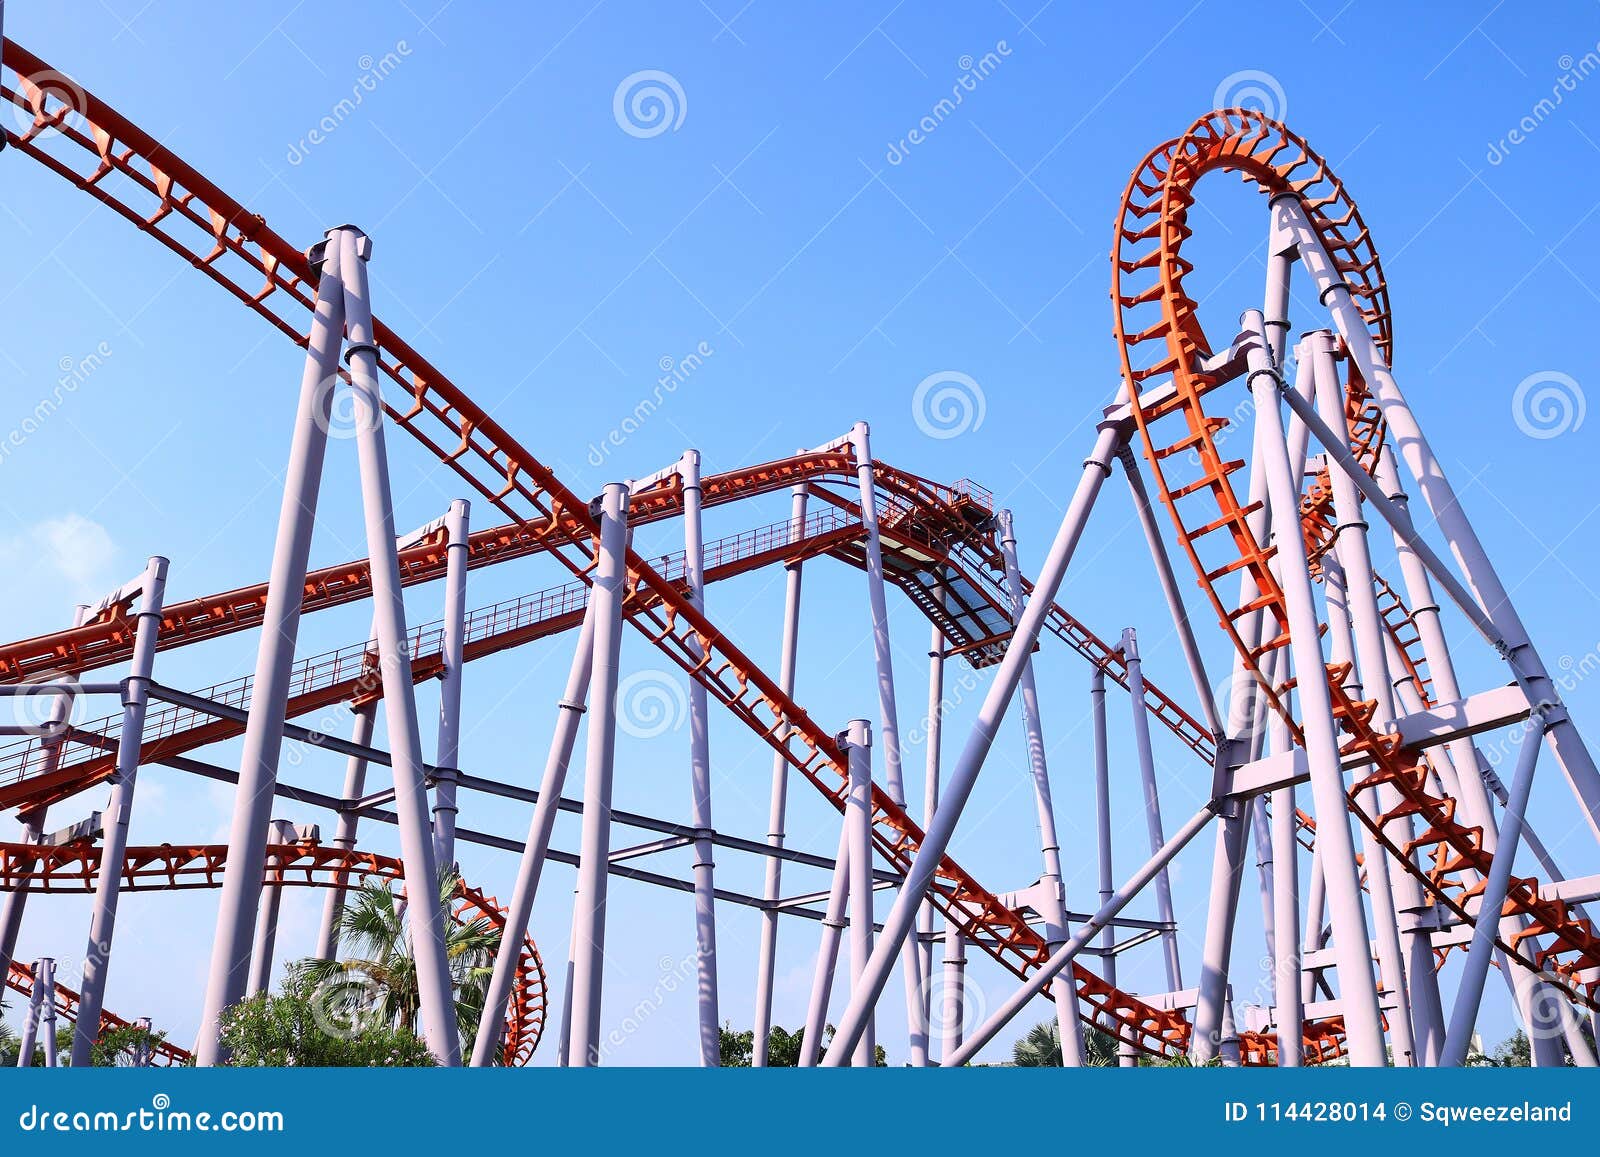 Roller Coaster with Blue Sky Stock Photo - Image of closeup, friend ...